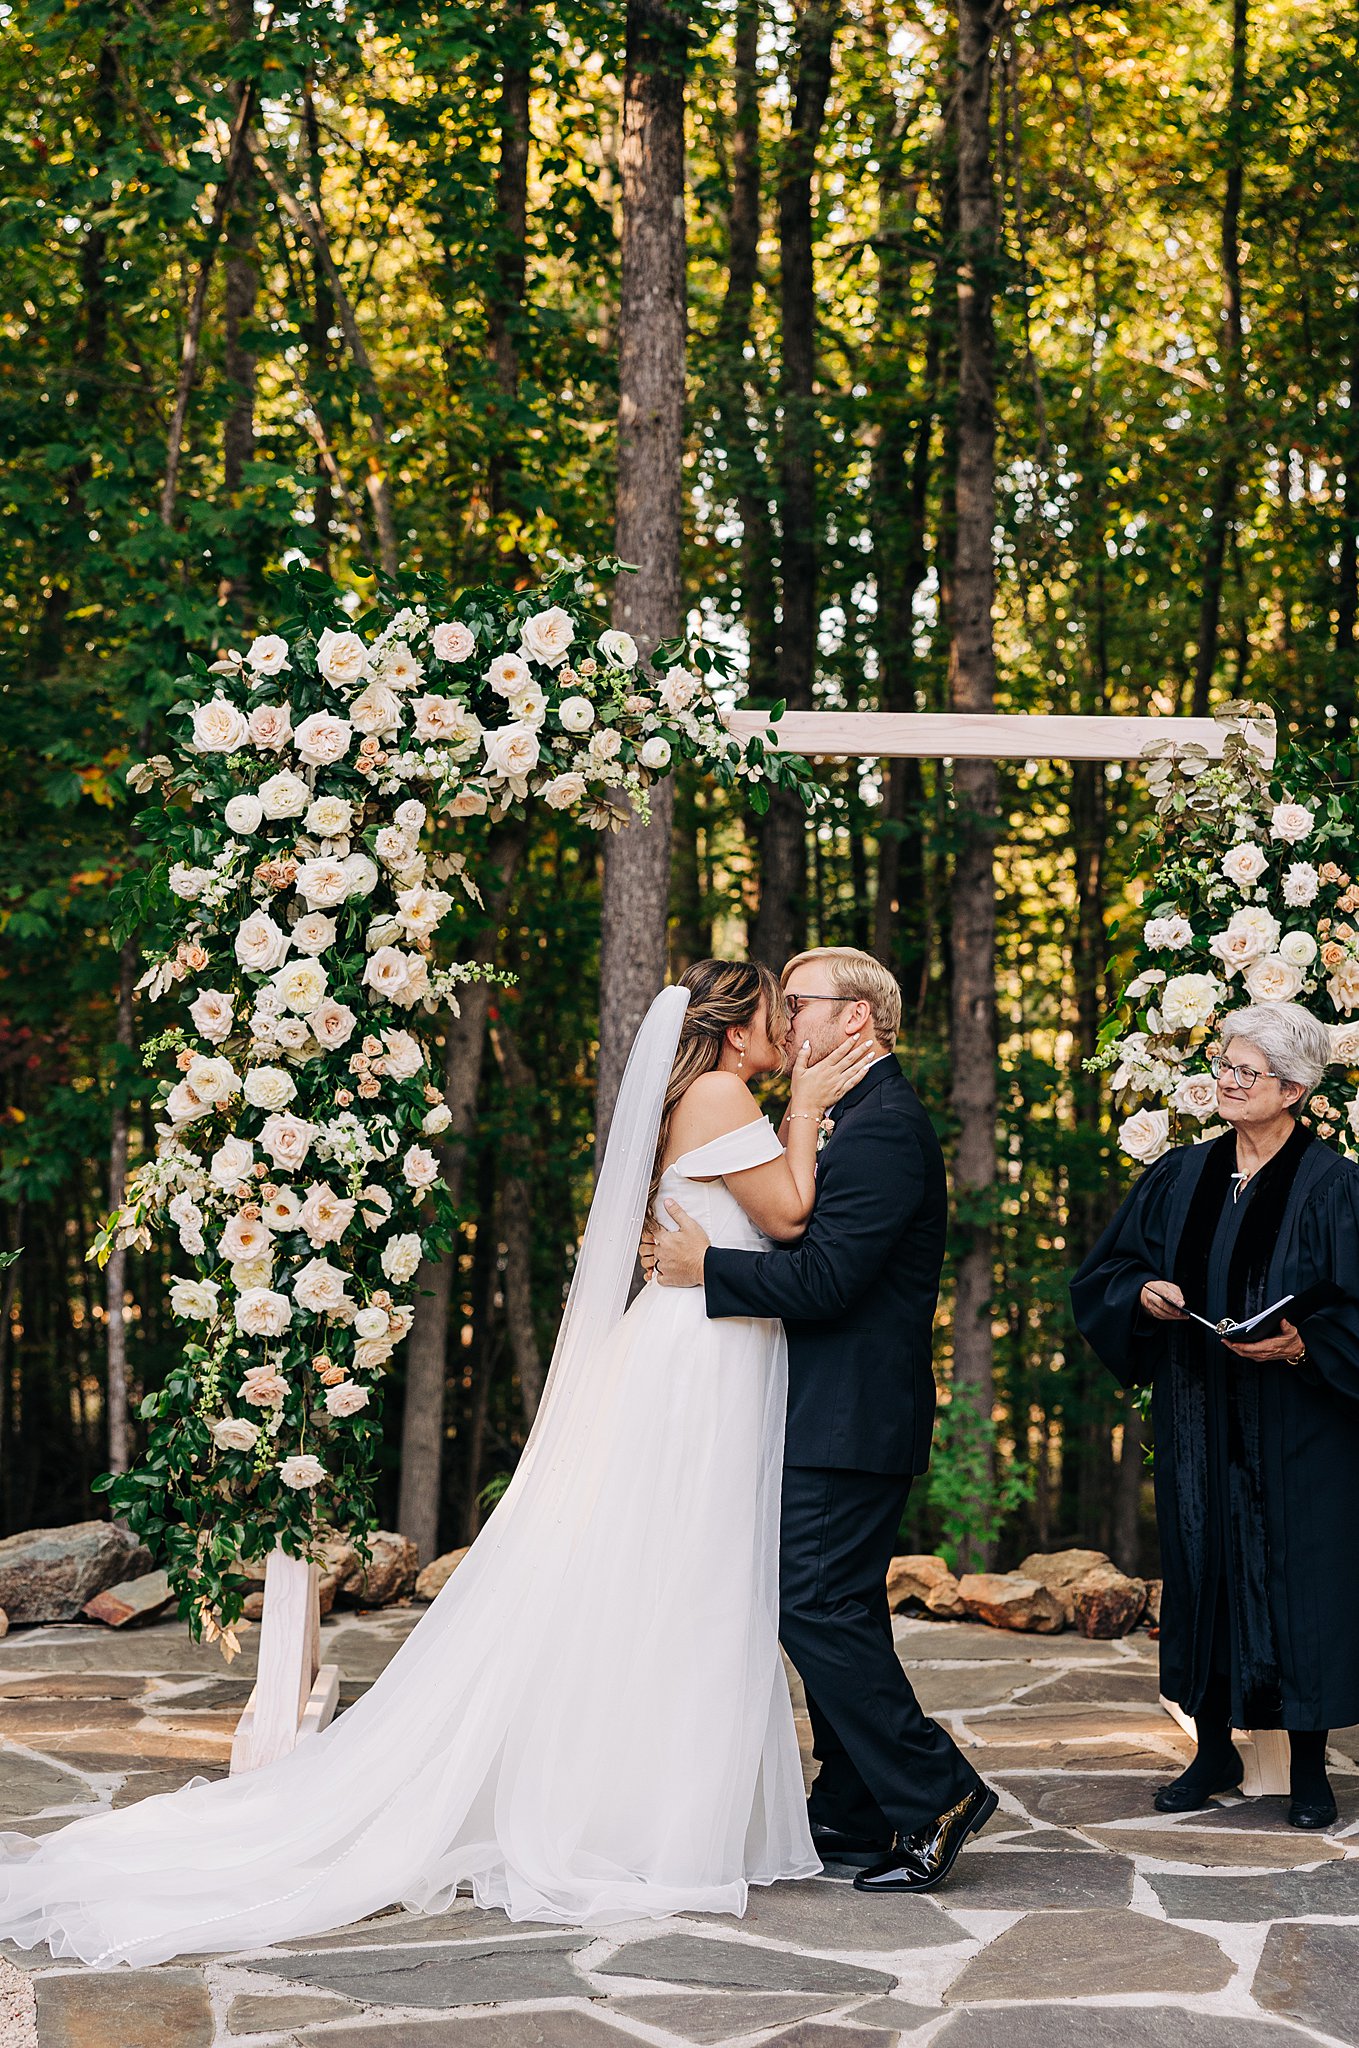 Newlyweds kiss under an outdoor arbor in the woofs to end their ceremony